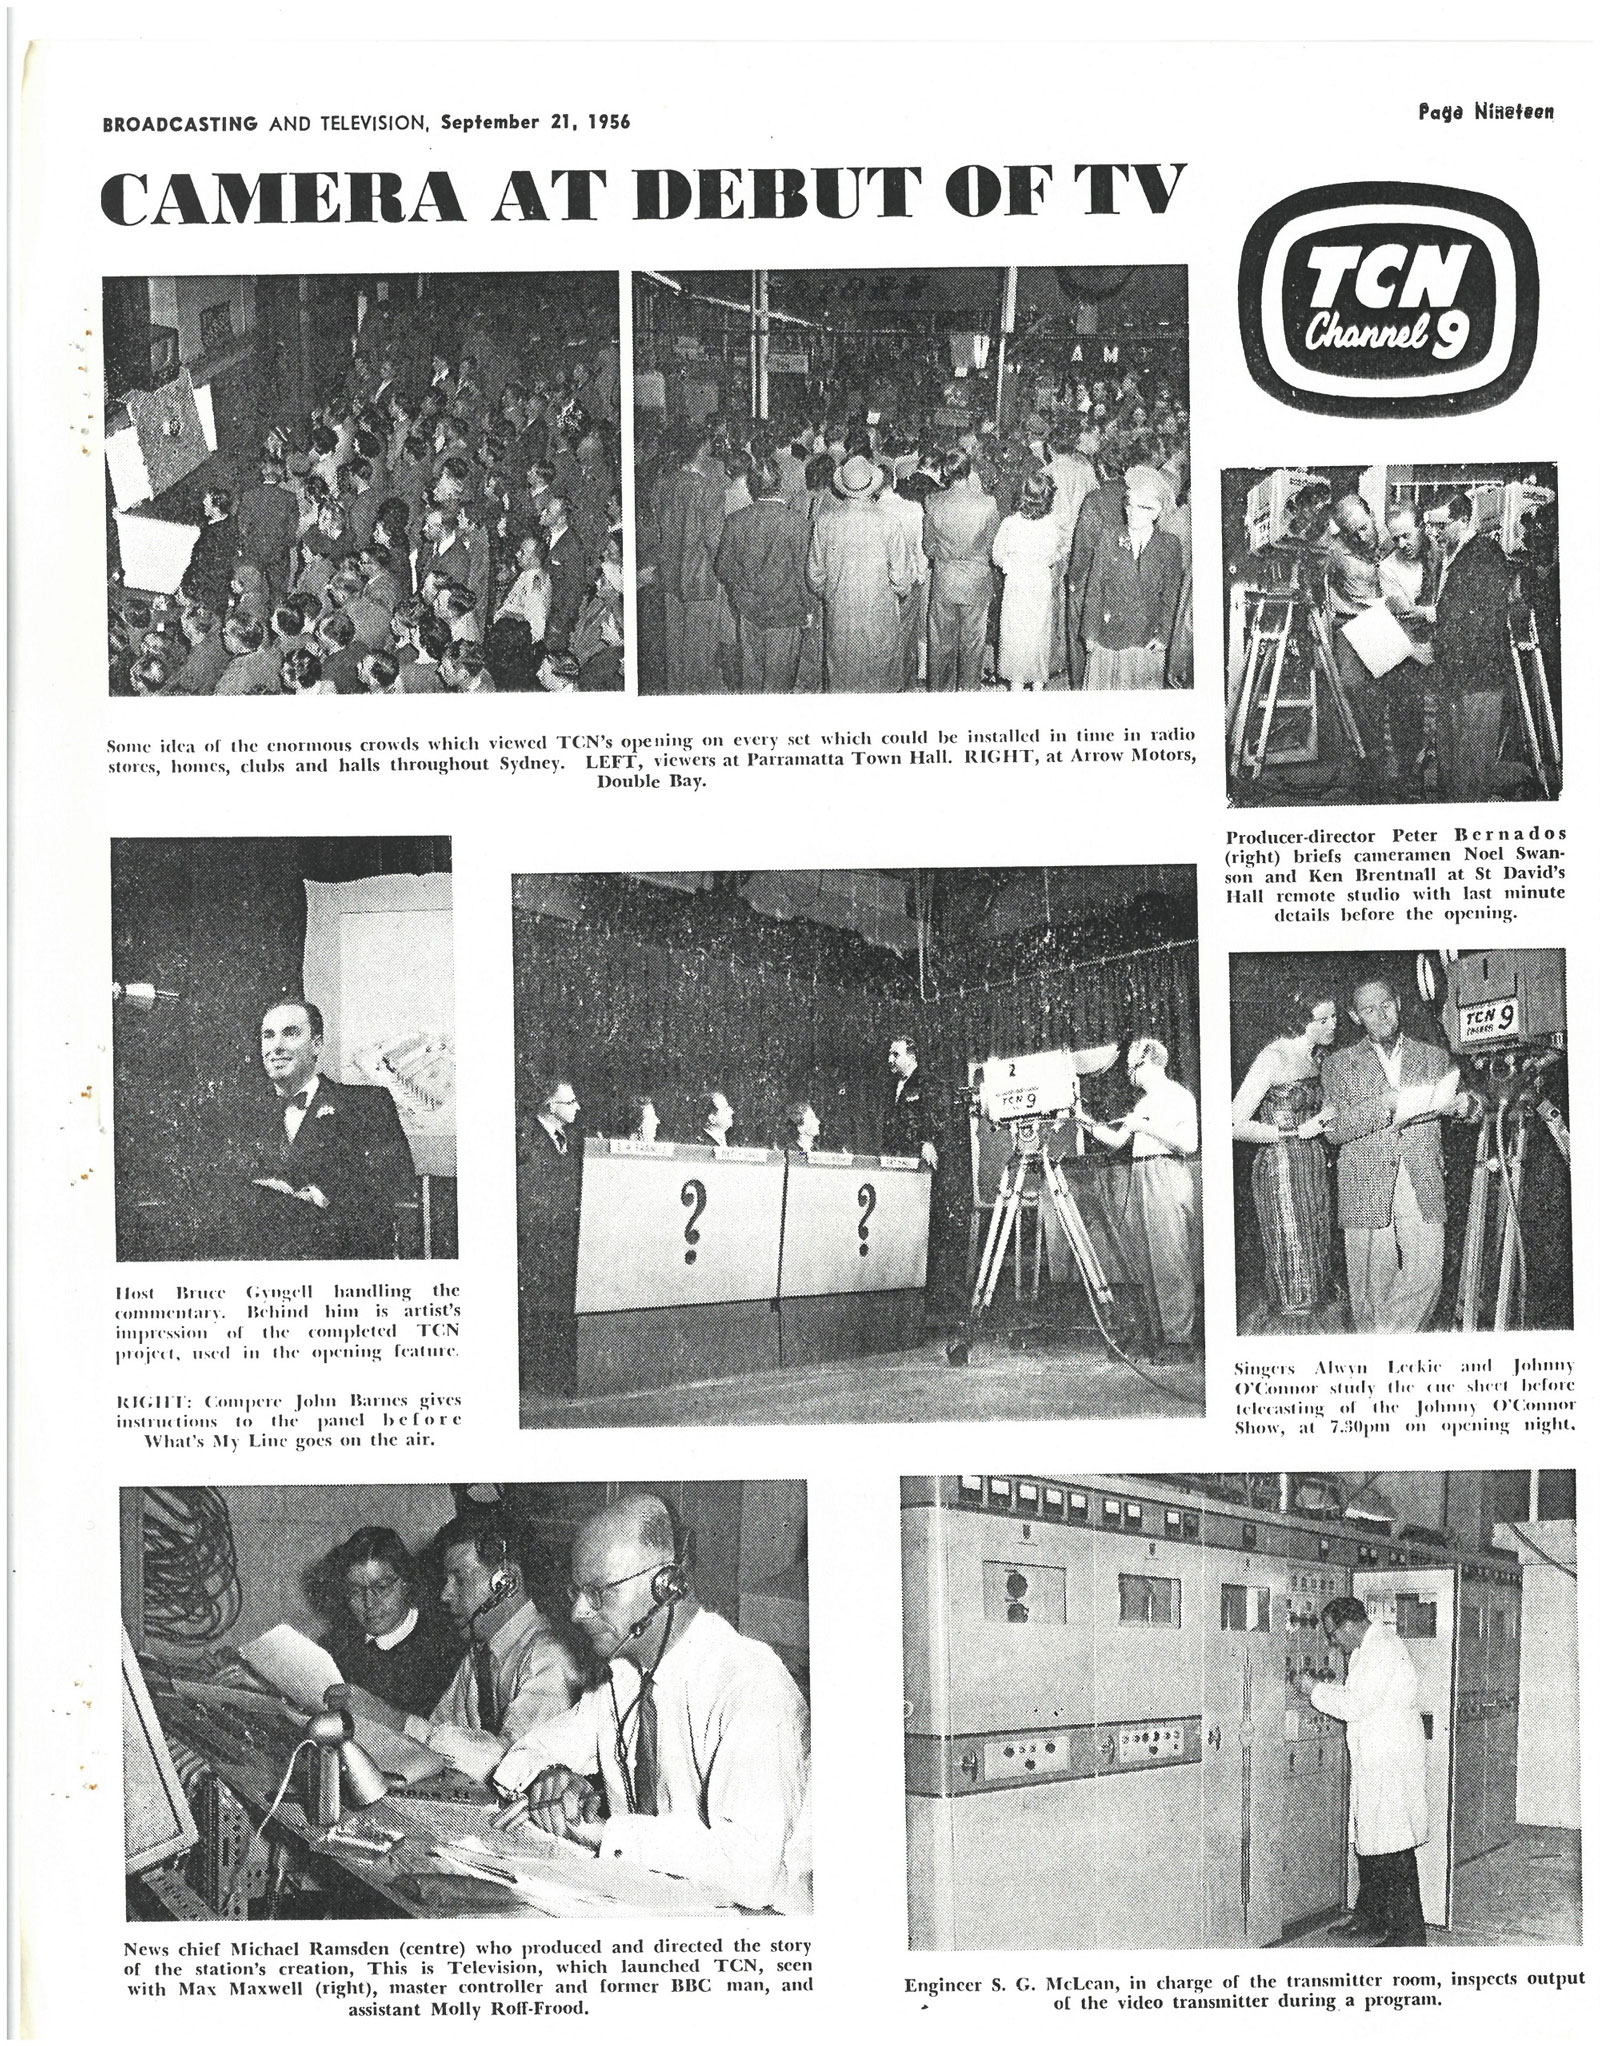 Page from B&T Journal, September 21, 1956 showing images from the first night of telvision showing crowds of people watching broadcast, camera operators at TCN studios and Bruce Gyngell presenting.